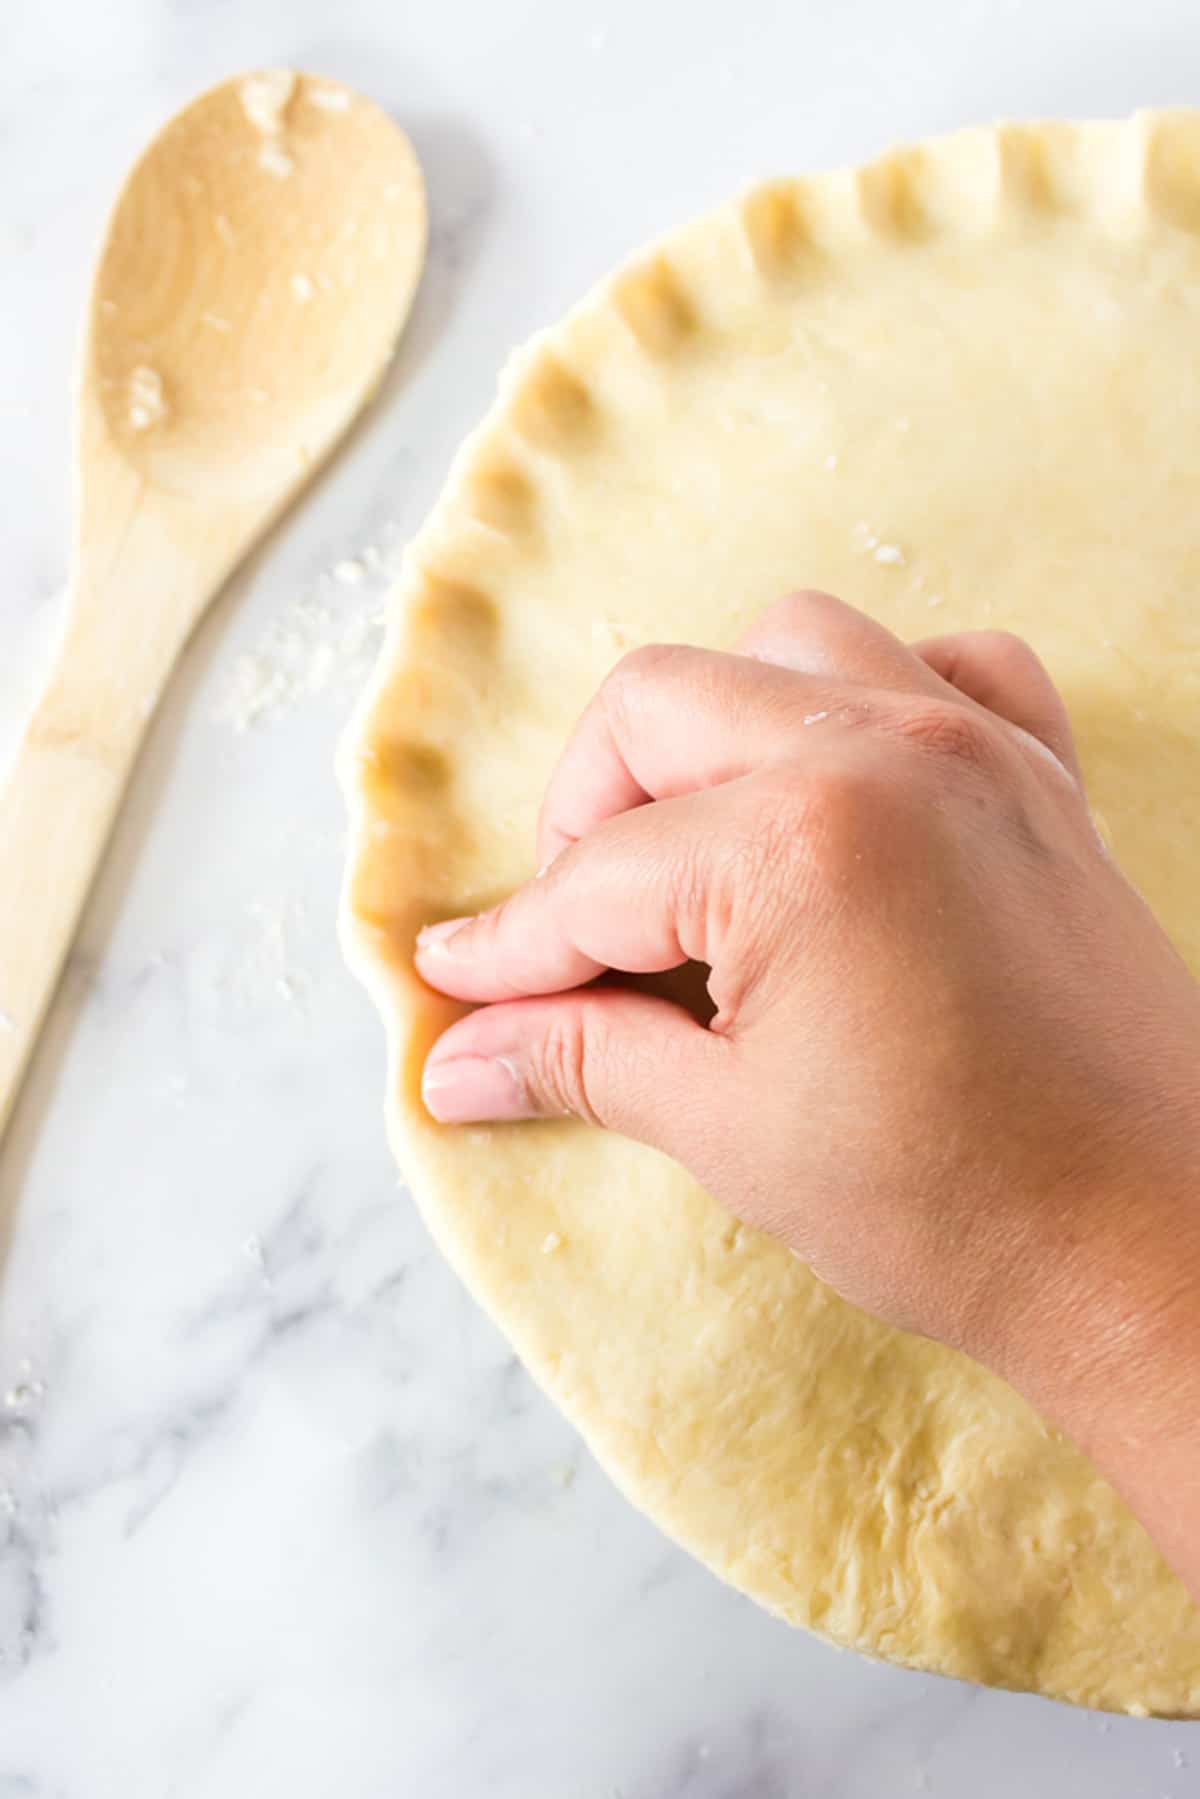 Someone's hand and fingers crimping a homemade pie crust.